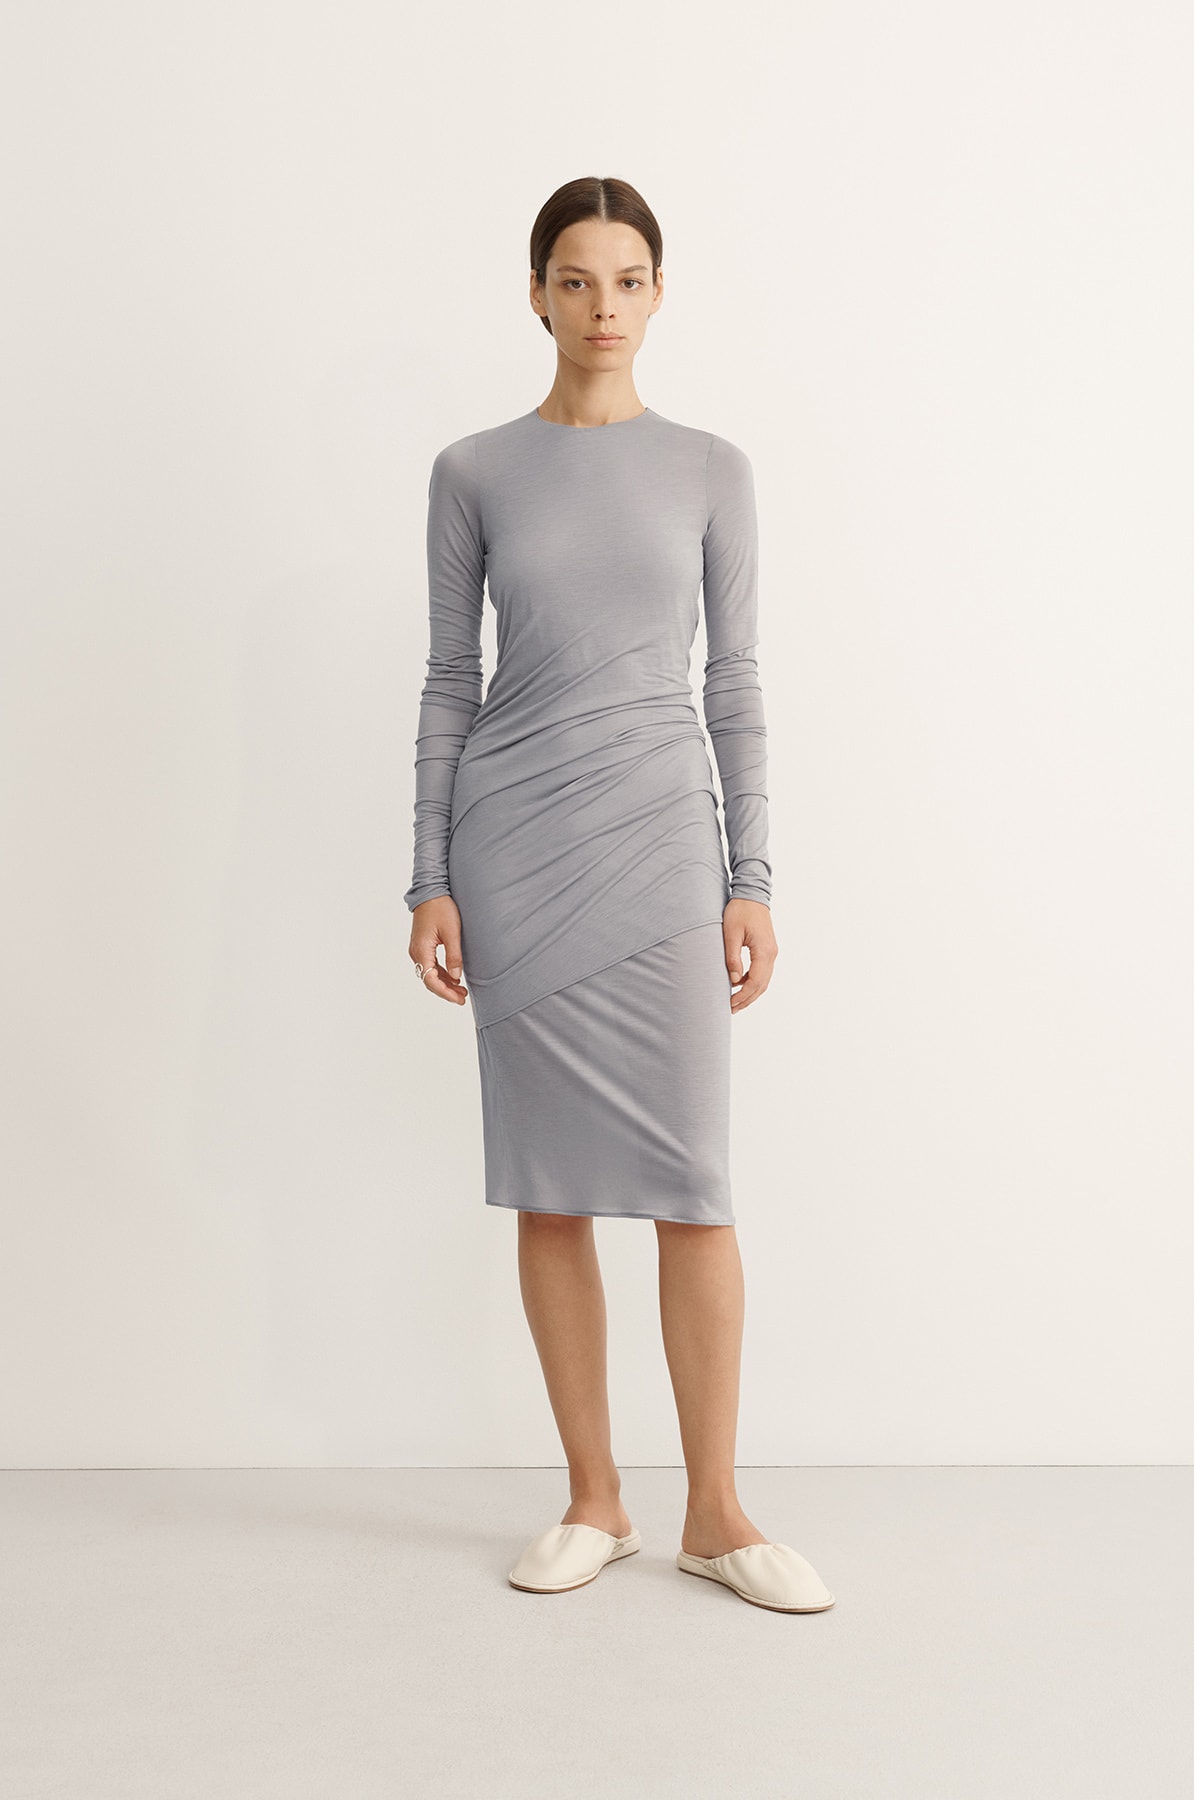 COS Spring Summer 2020 Collection Lookbook Jersey Dress Pewter